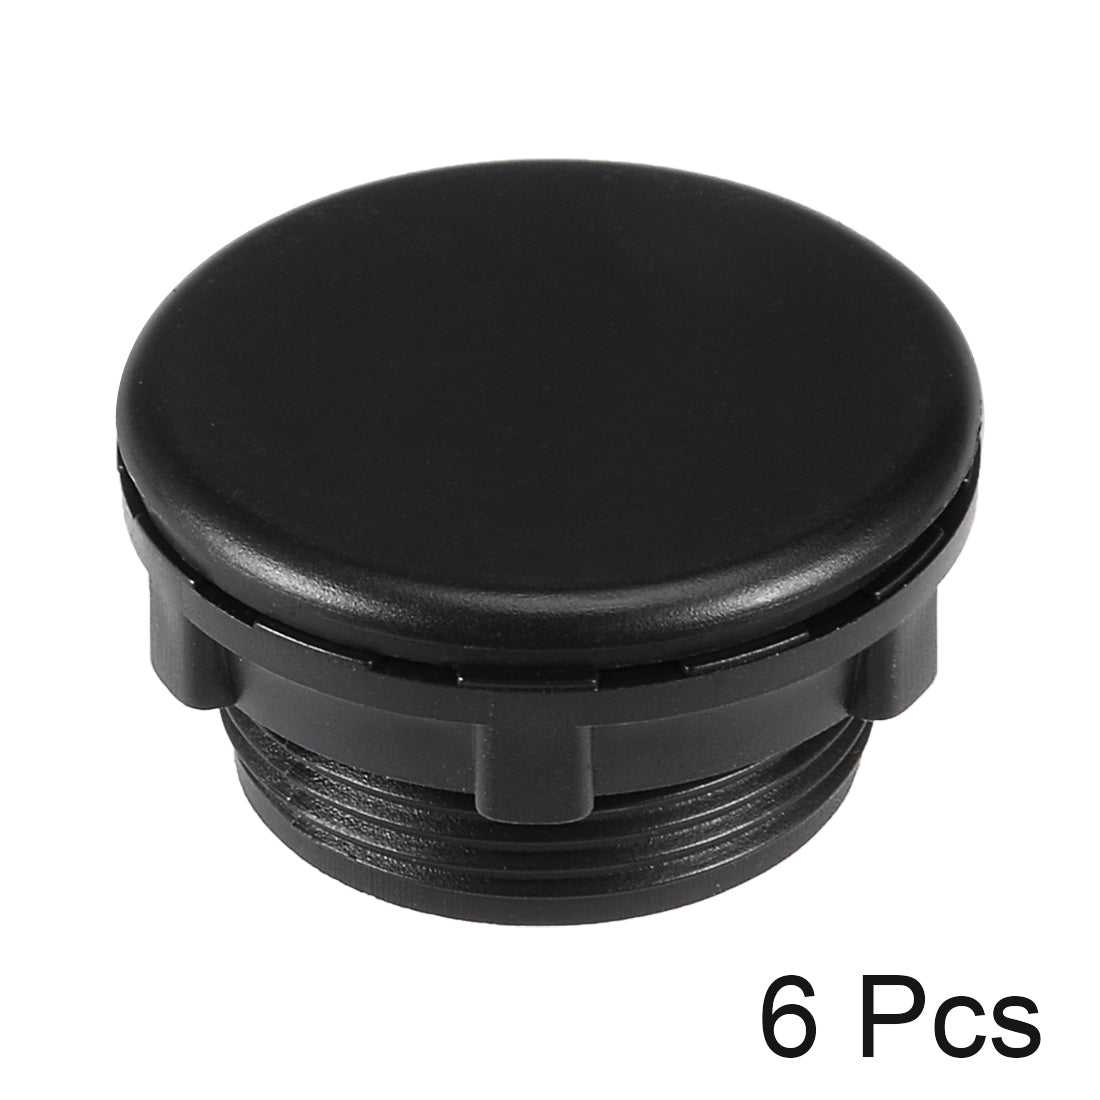 uxcell Uxcell 6 Pcs 30mm Black Plastic Push Button Switch Hole Panel Plug